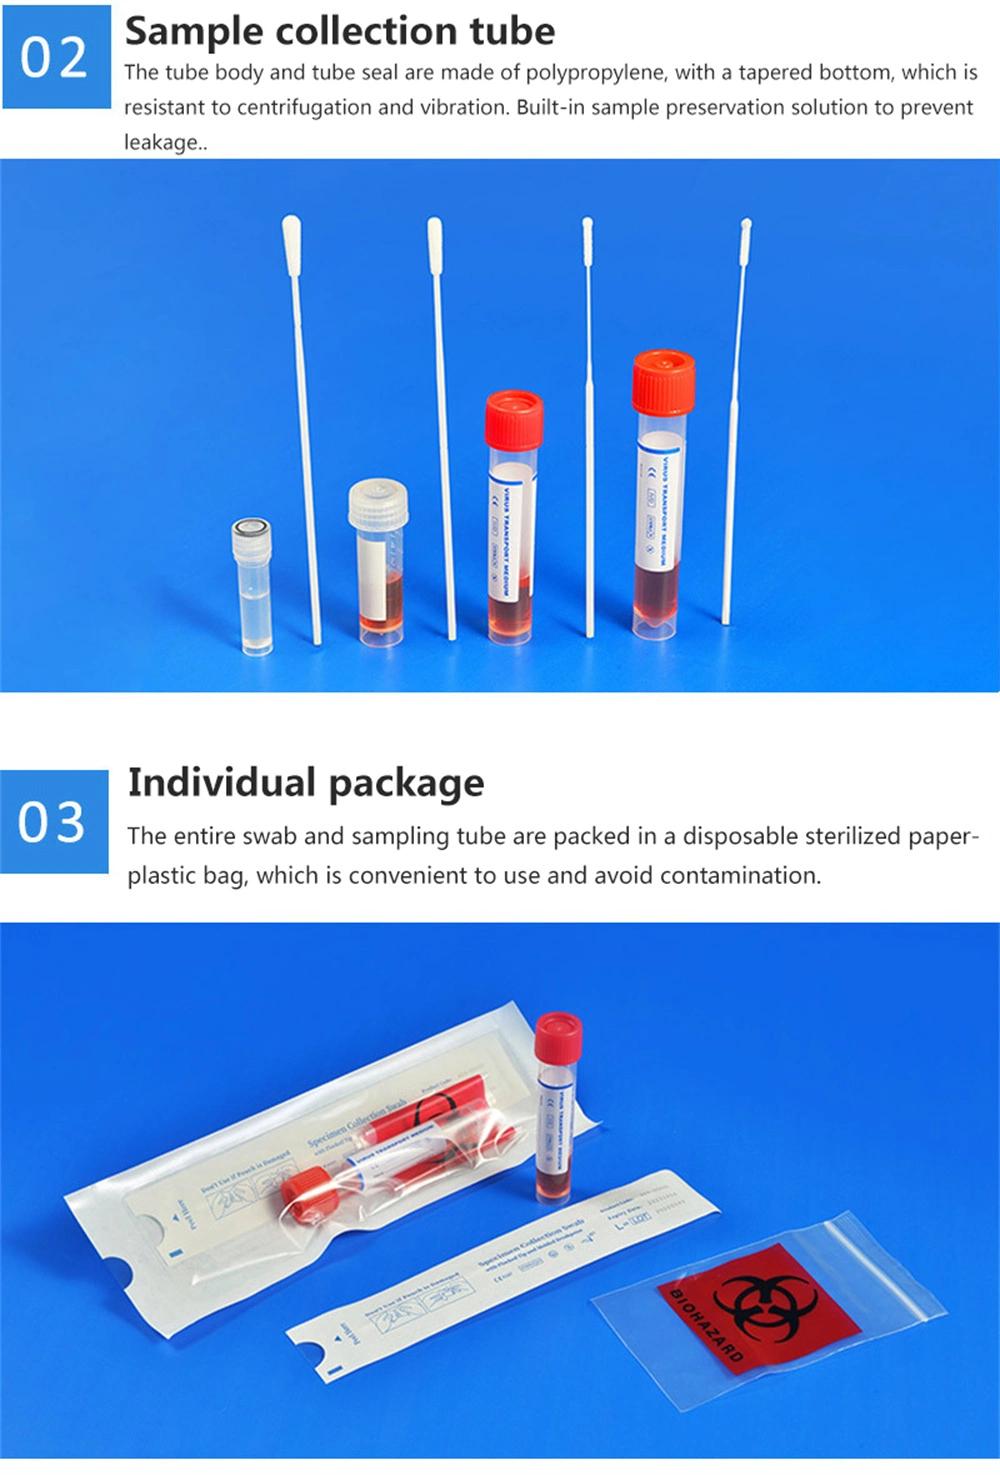 Vtm Active Virus Collection and Transport Kits with Swab/Sampling Oropharyngeal Throat Test